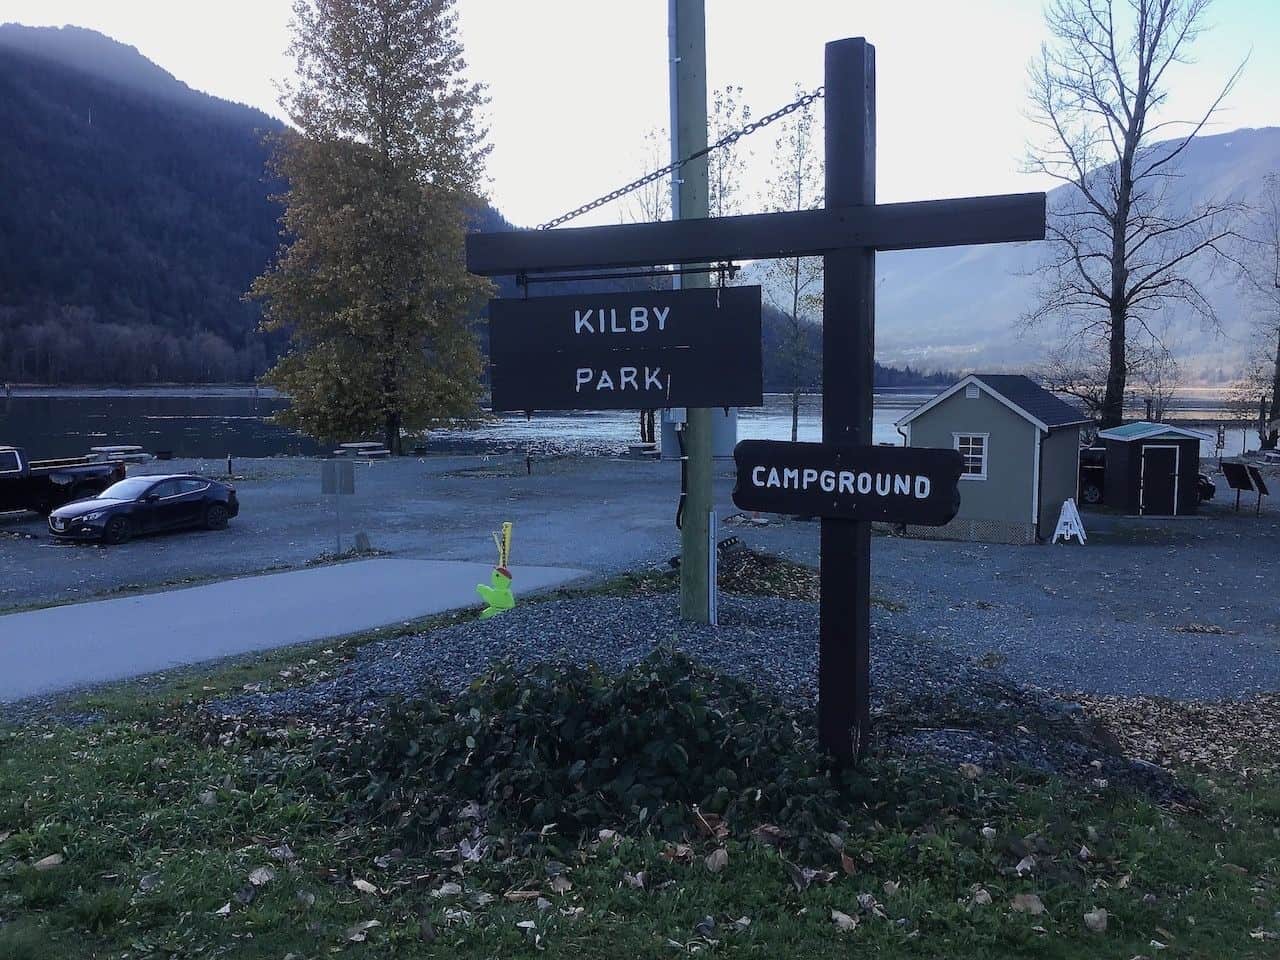 Kilby Park and Campground is a popular park for RVs and camping near Harrison Mills BC.